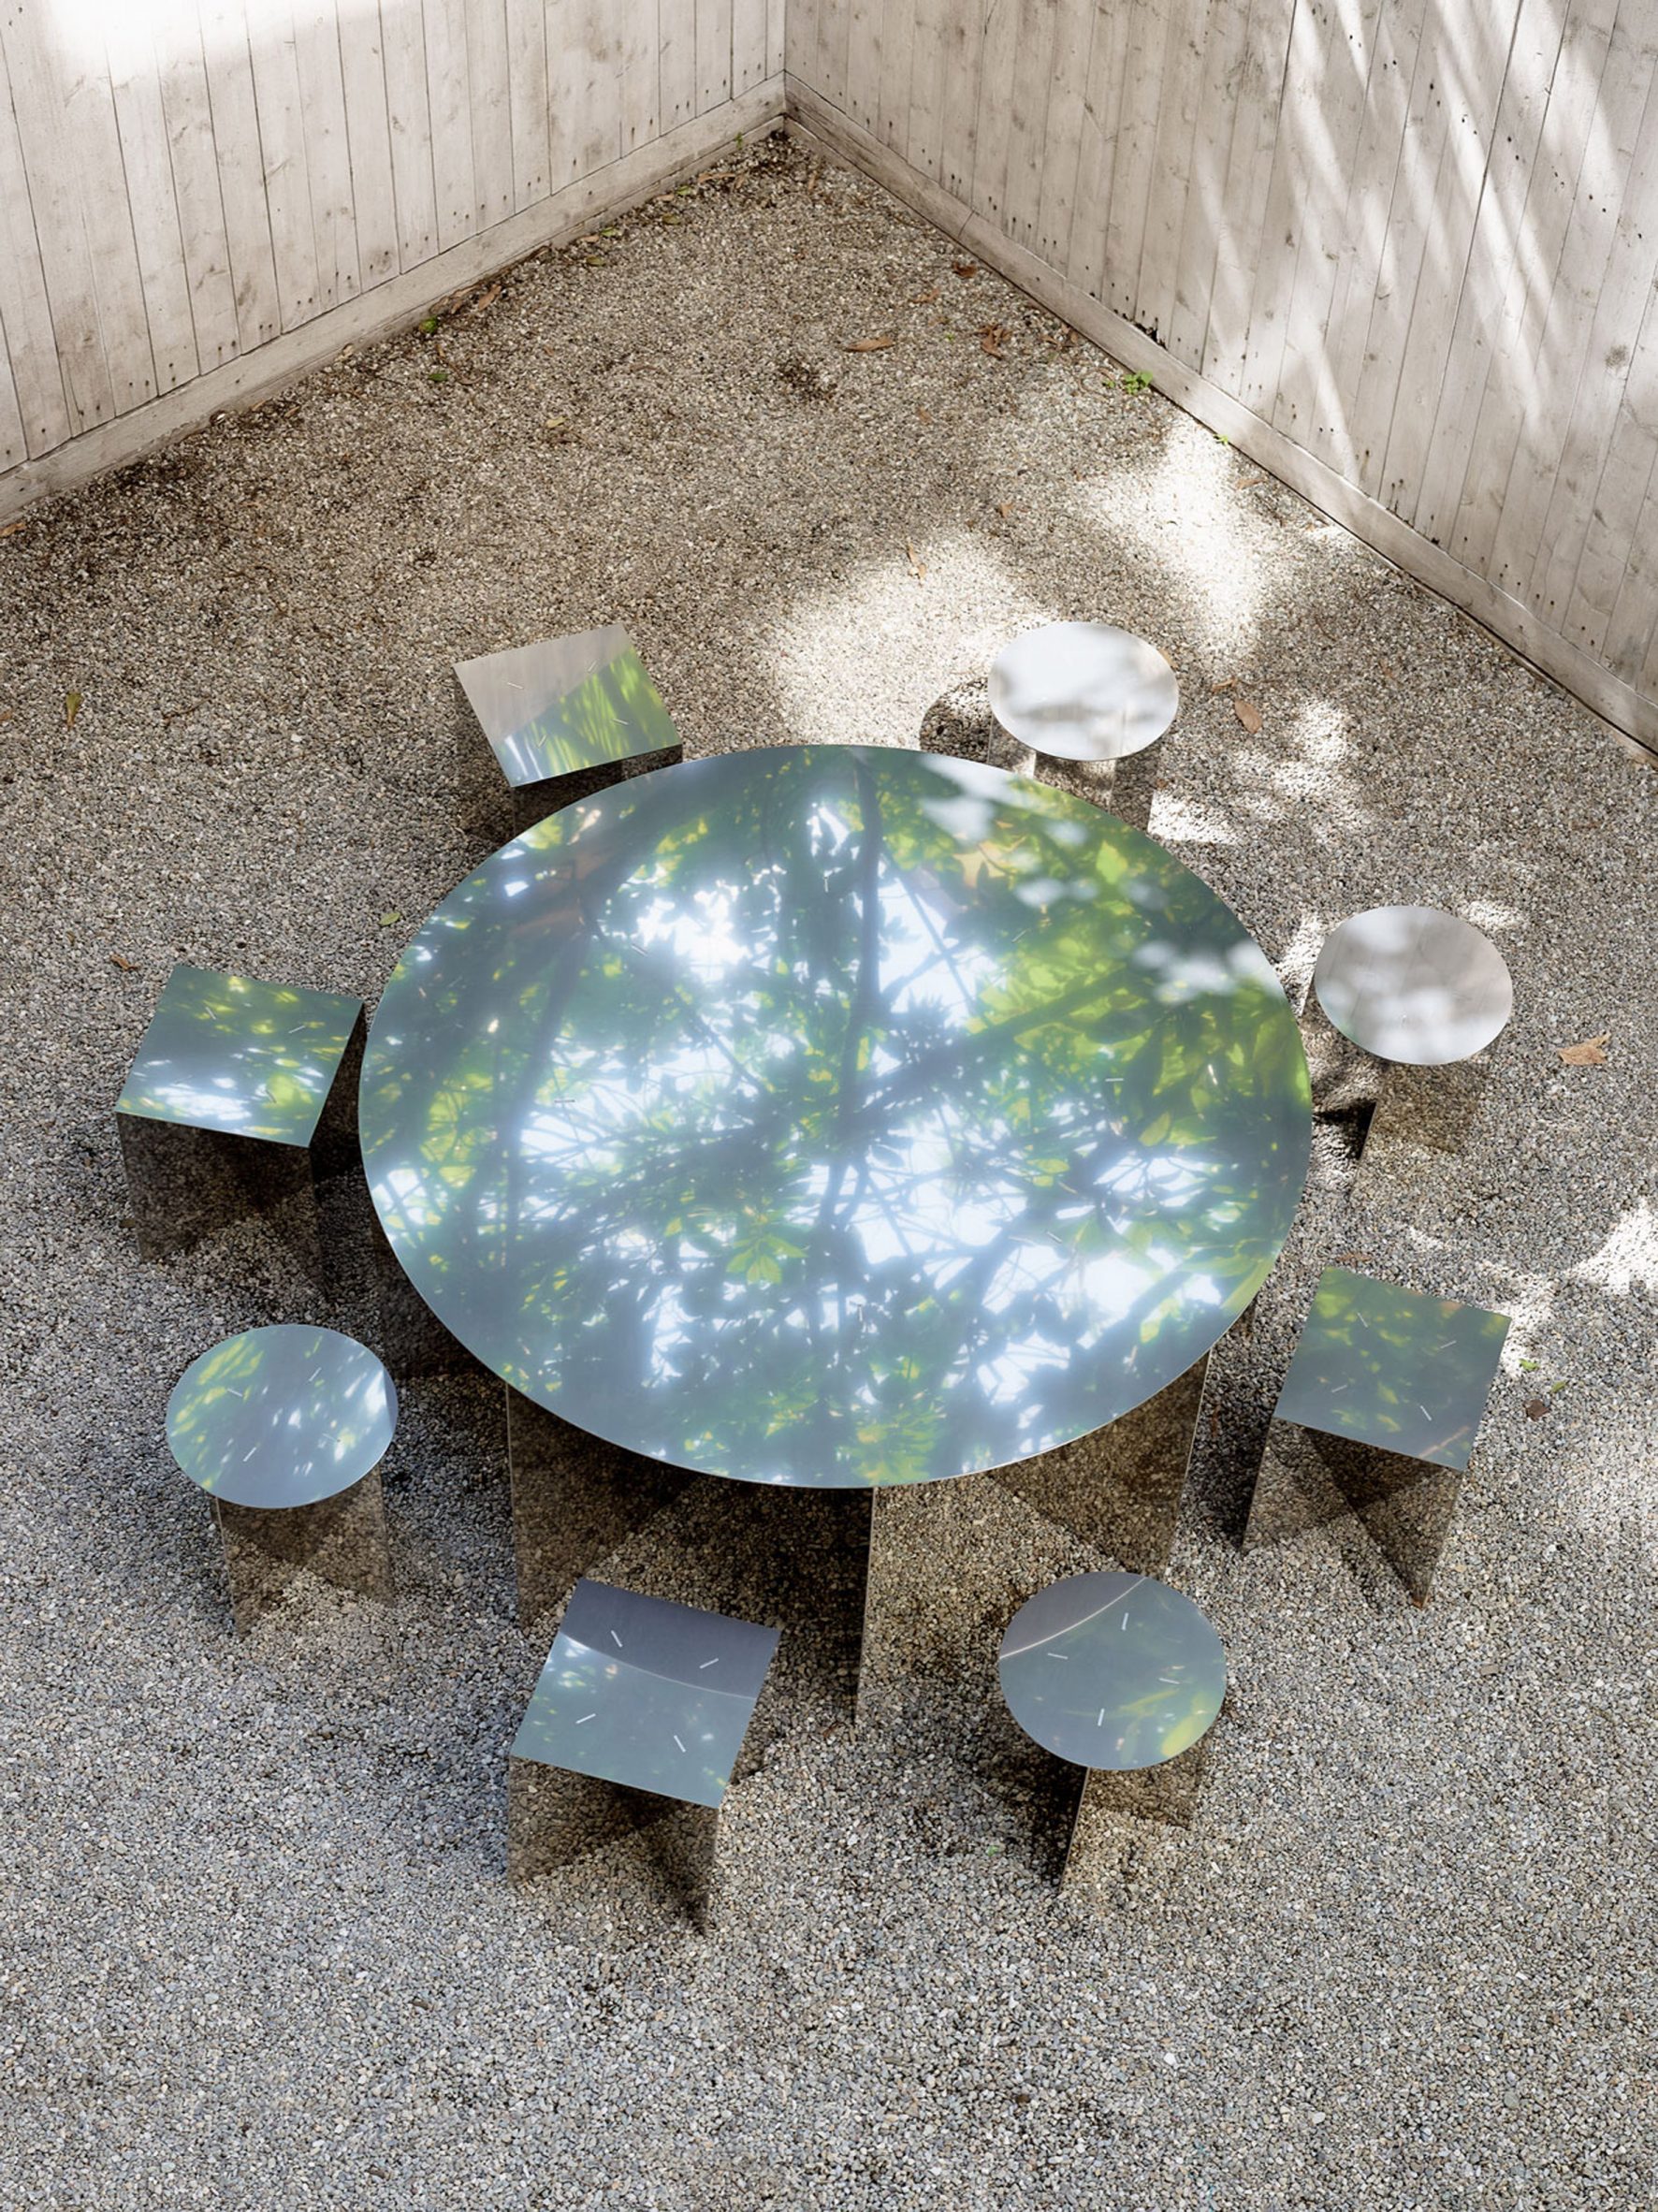 A metal table and chair reflects the trees and shrubbery